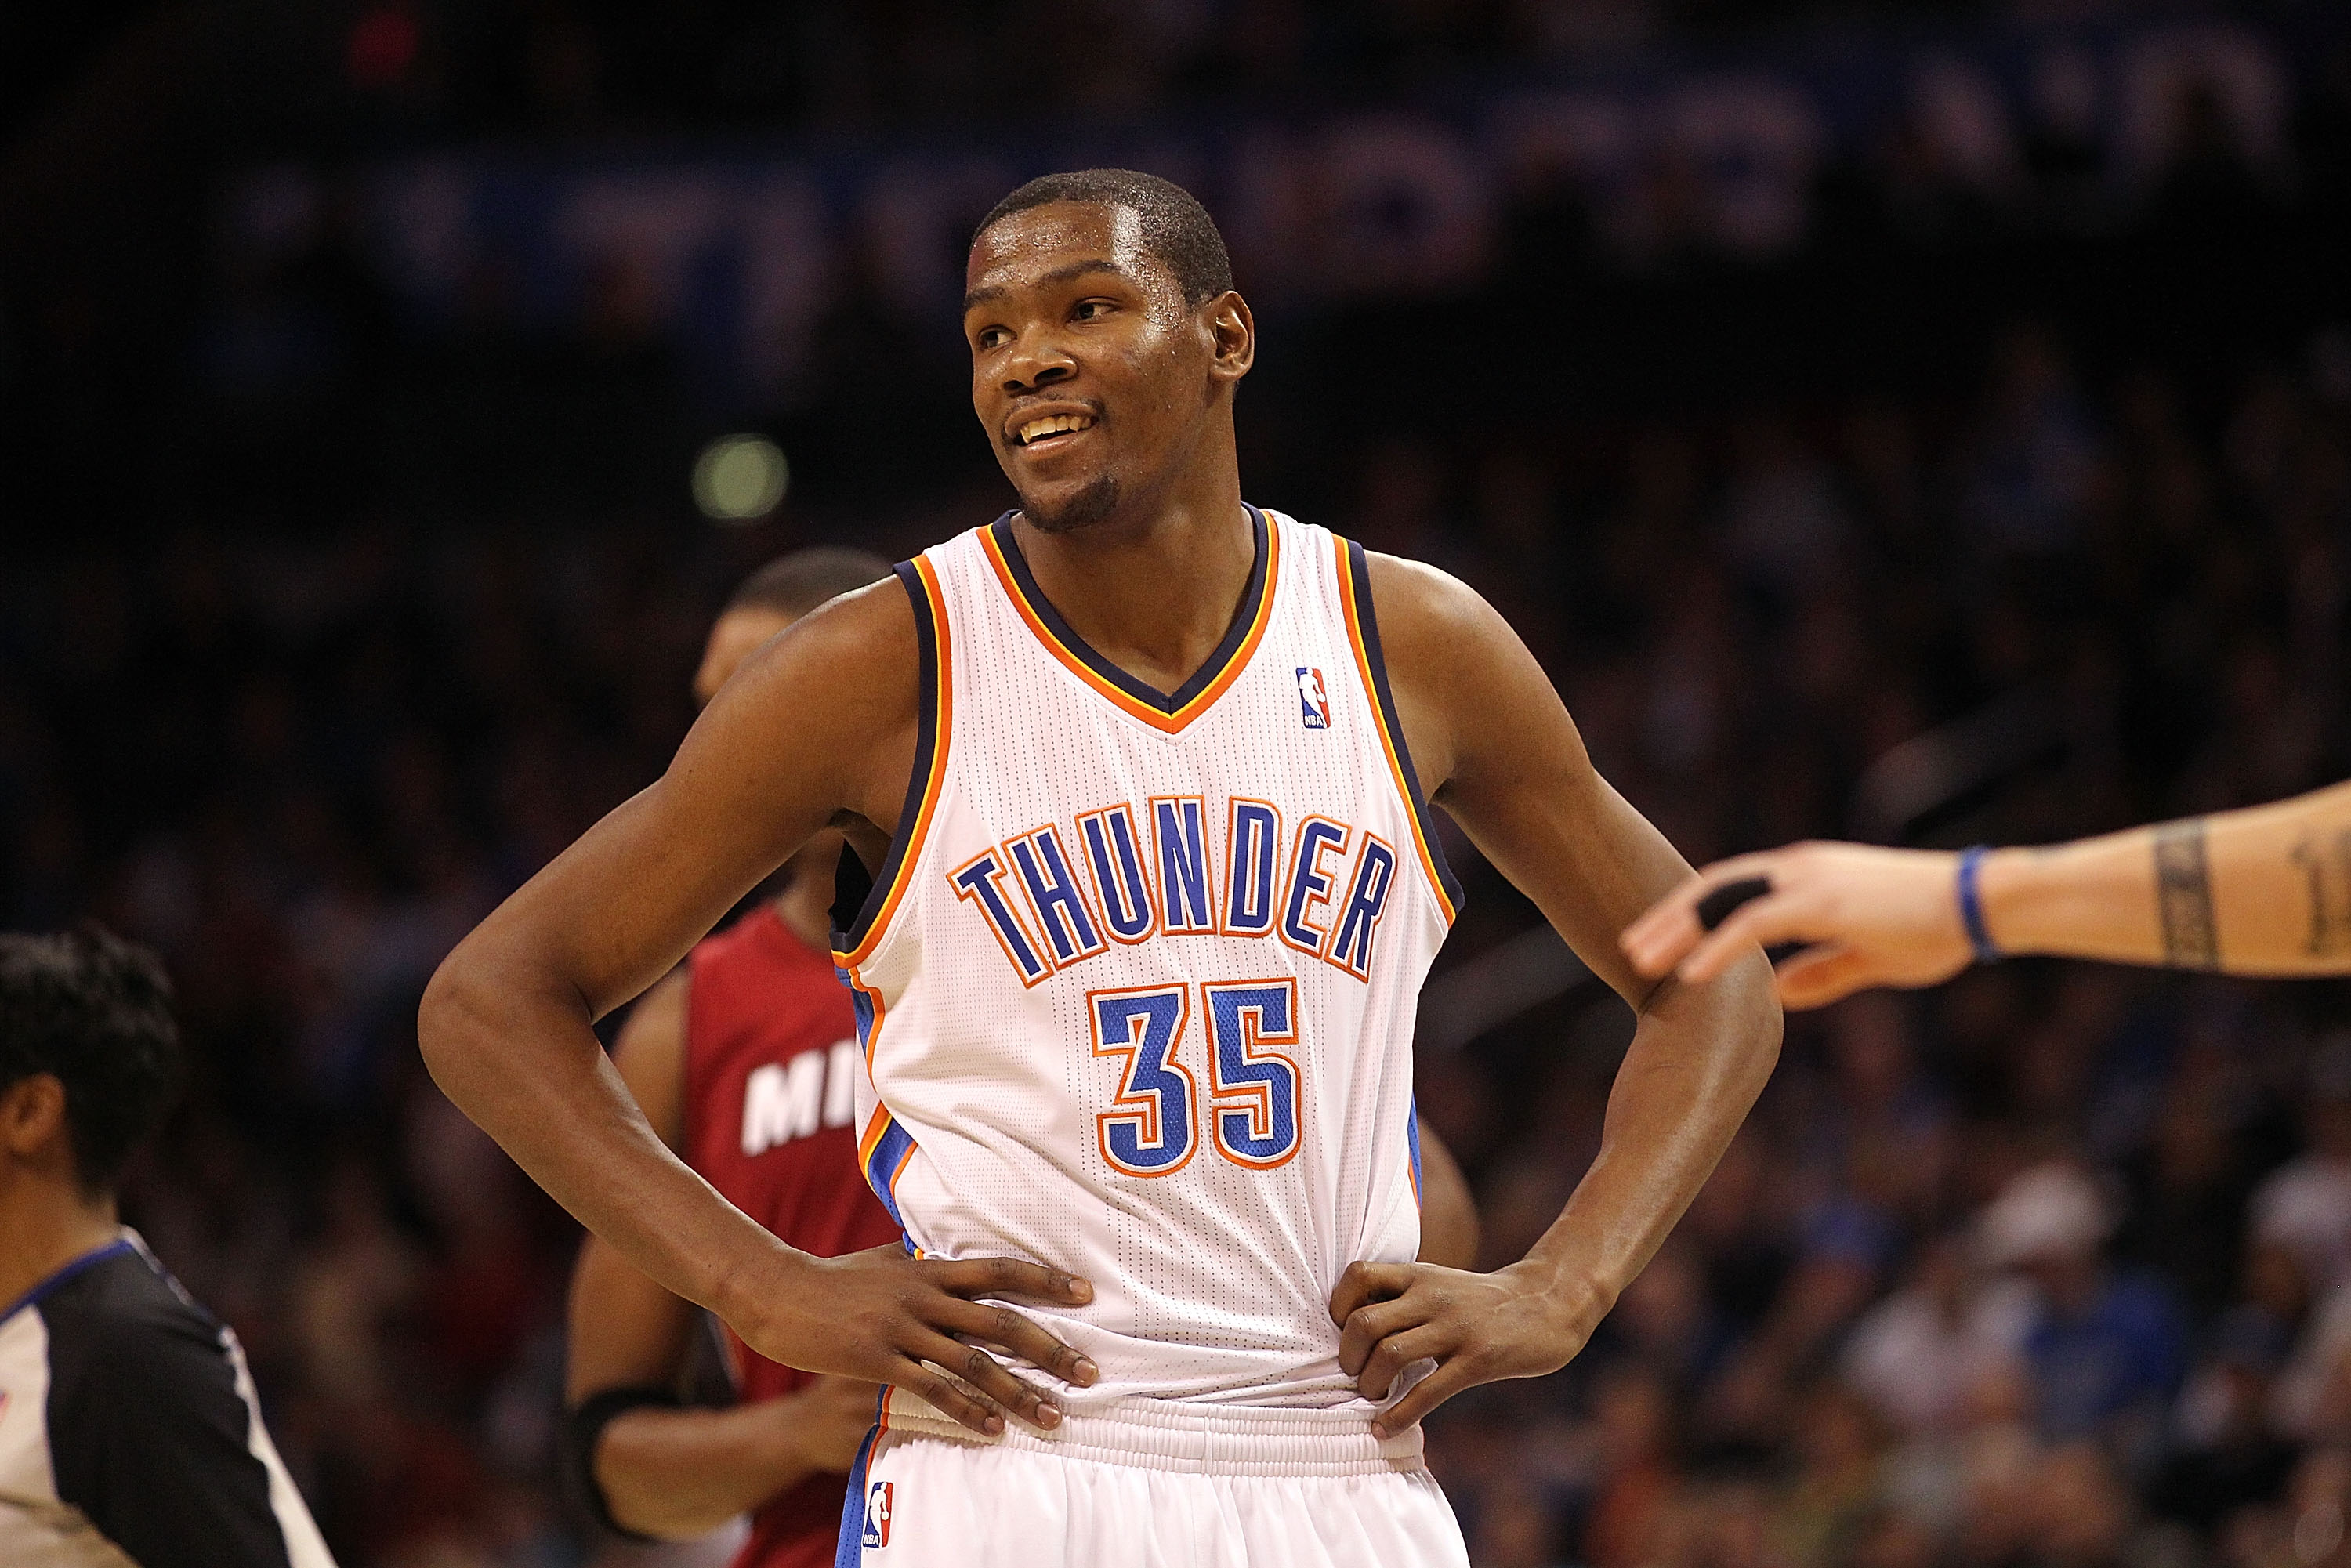 OKLAHOMA CITY, OK - JANUARY 30:  Kevin Durant #35 of the Oklahoma City Thunder at Ford Center on January 30, 2011 in Oklahoma City, Oklahoma.  NOTE TO USER: User expressly acknowledges and agrees that, by downloading and or using this photograph, User is